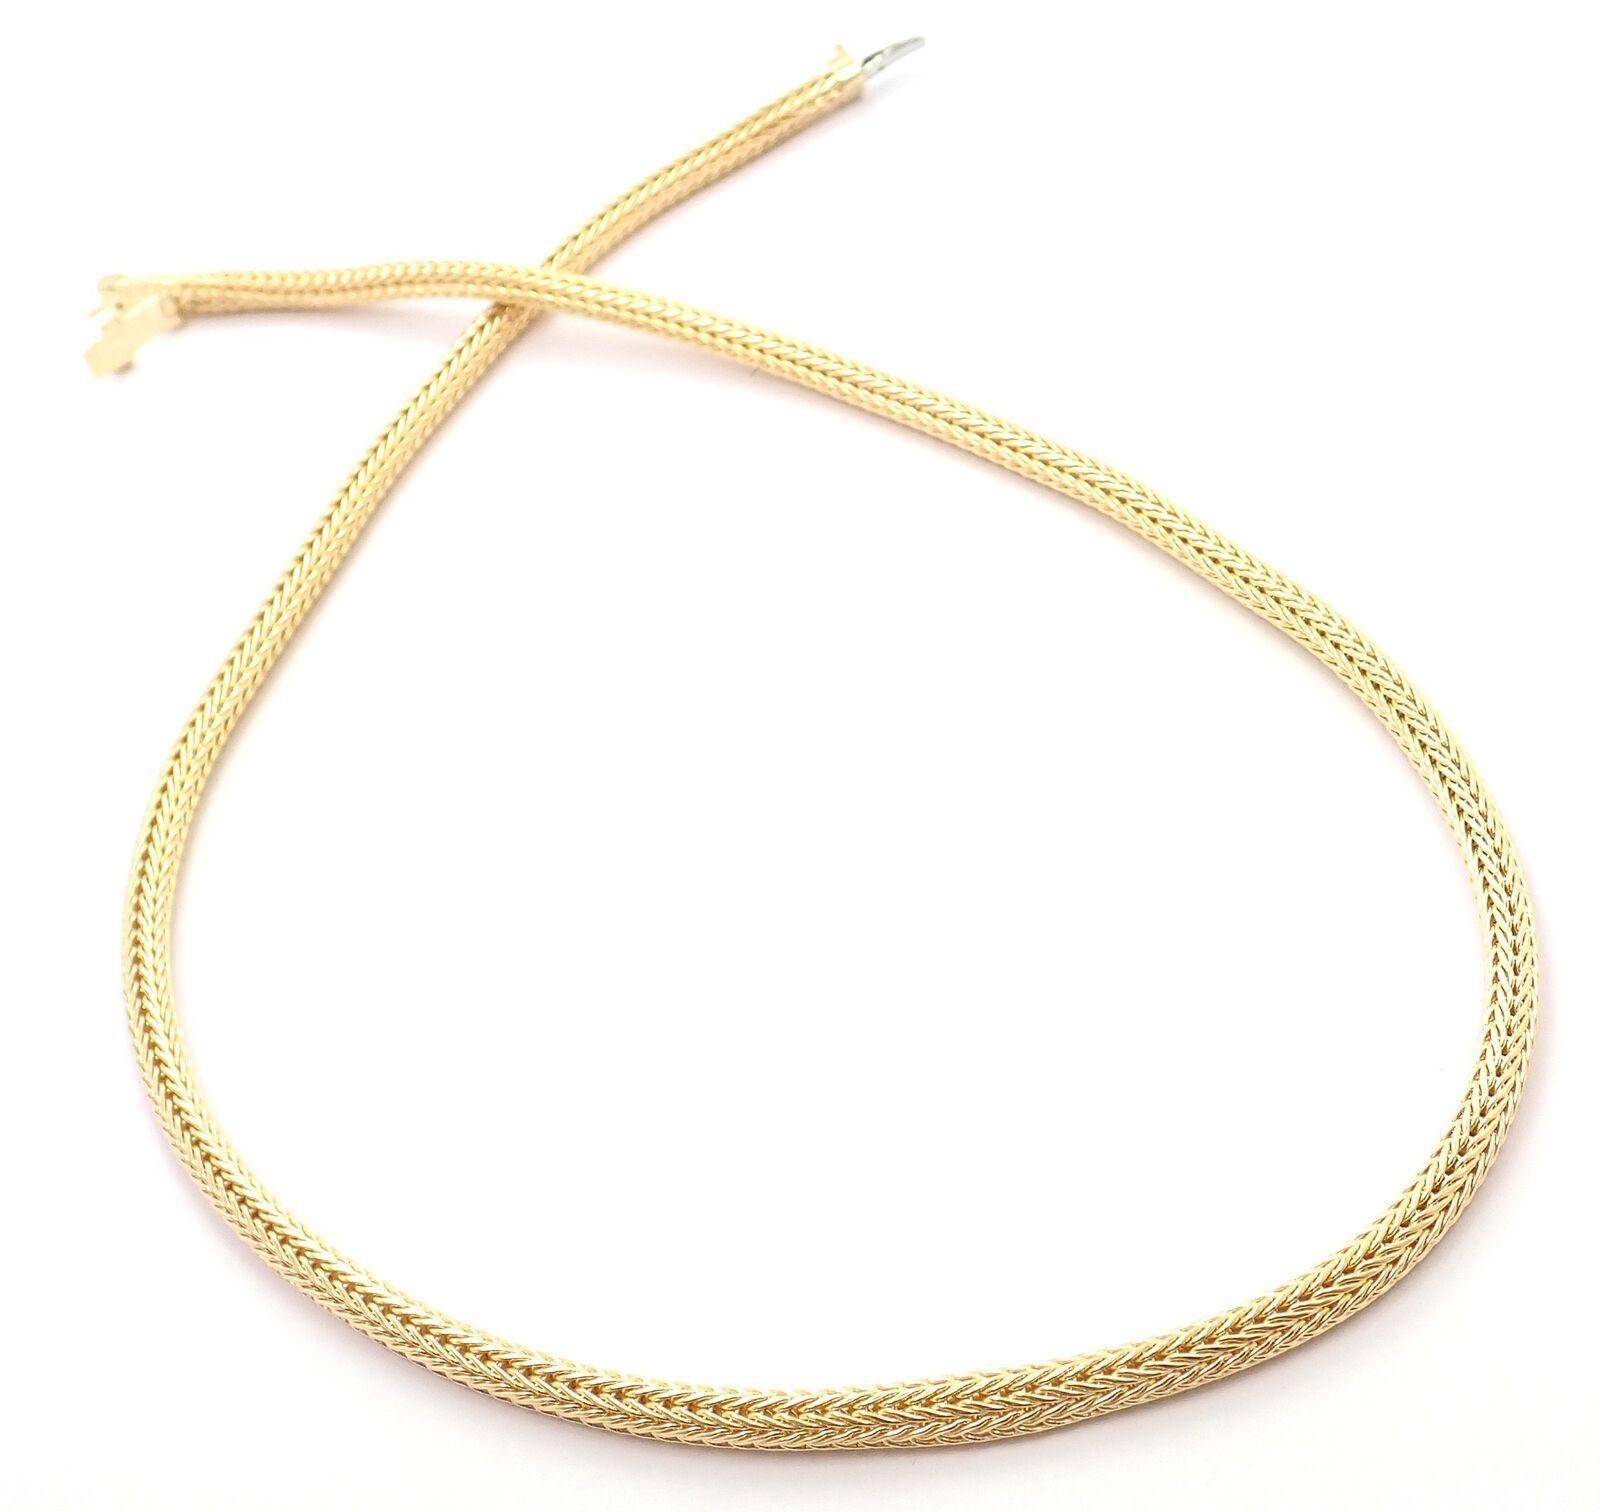 Vintage Tiffany & Co Foxtail Link Yellow Gold Chain Necklace In Excellent Condition For Sale In Holland, PA